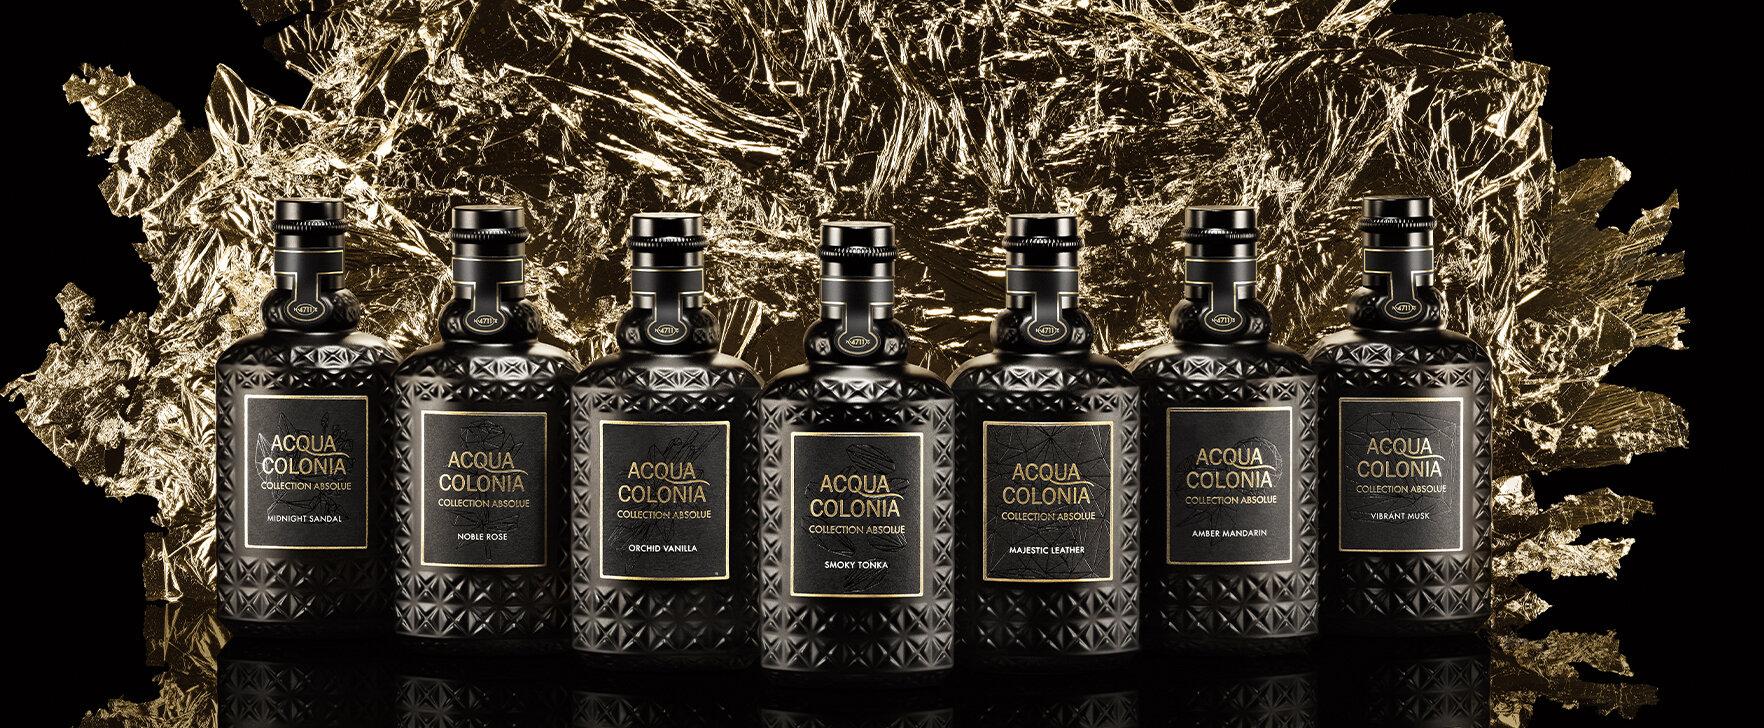 An Ode to Haute Perfumery: The New "Acqua Colonia Collection Absolue" by 4711